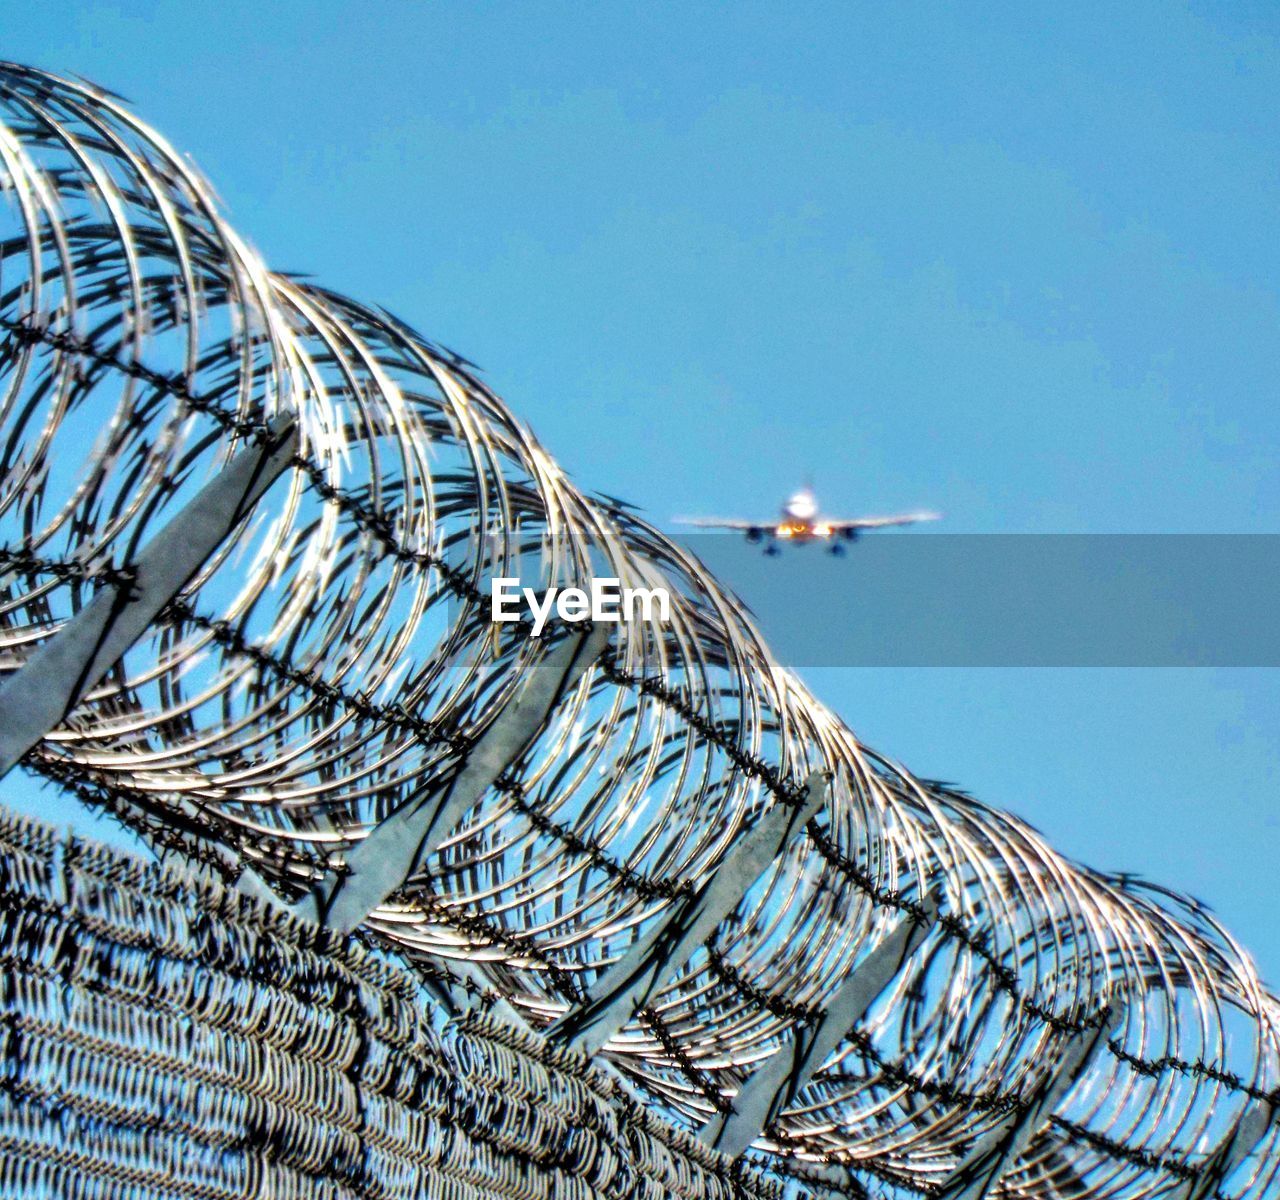 Low angle view of plane landing against clear blue sky with barbed wire fence 